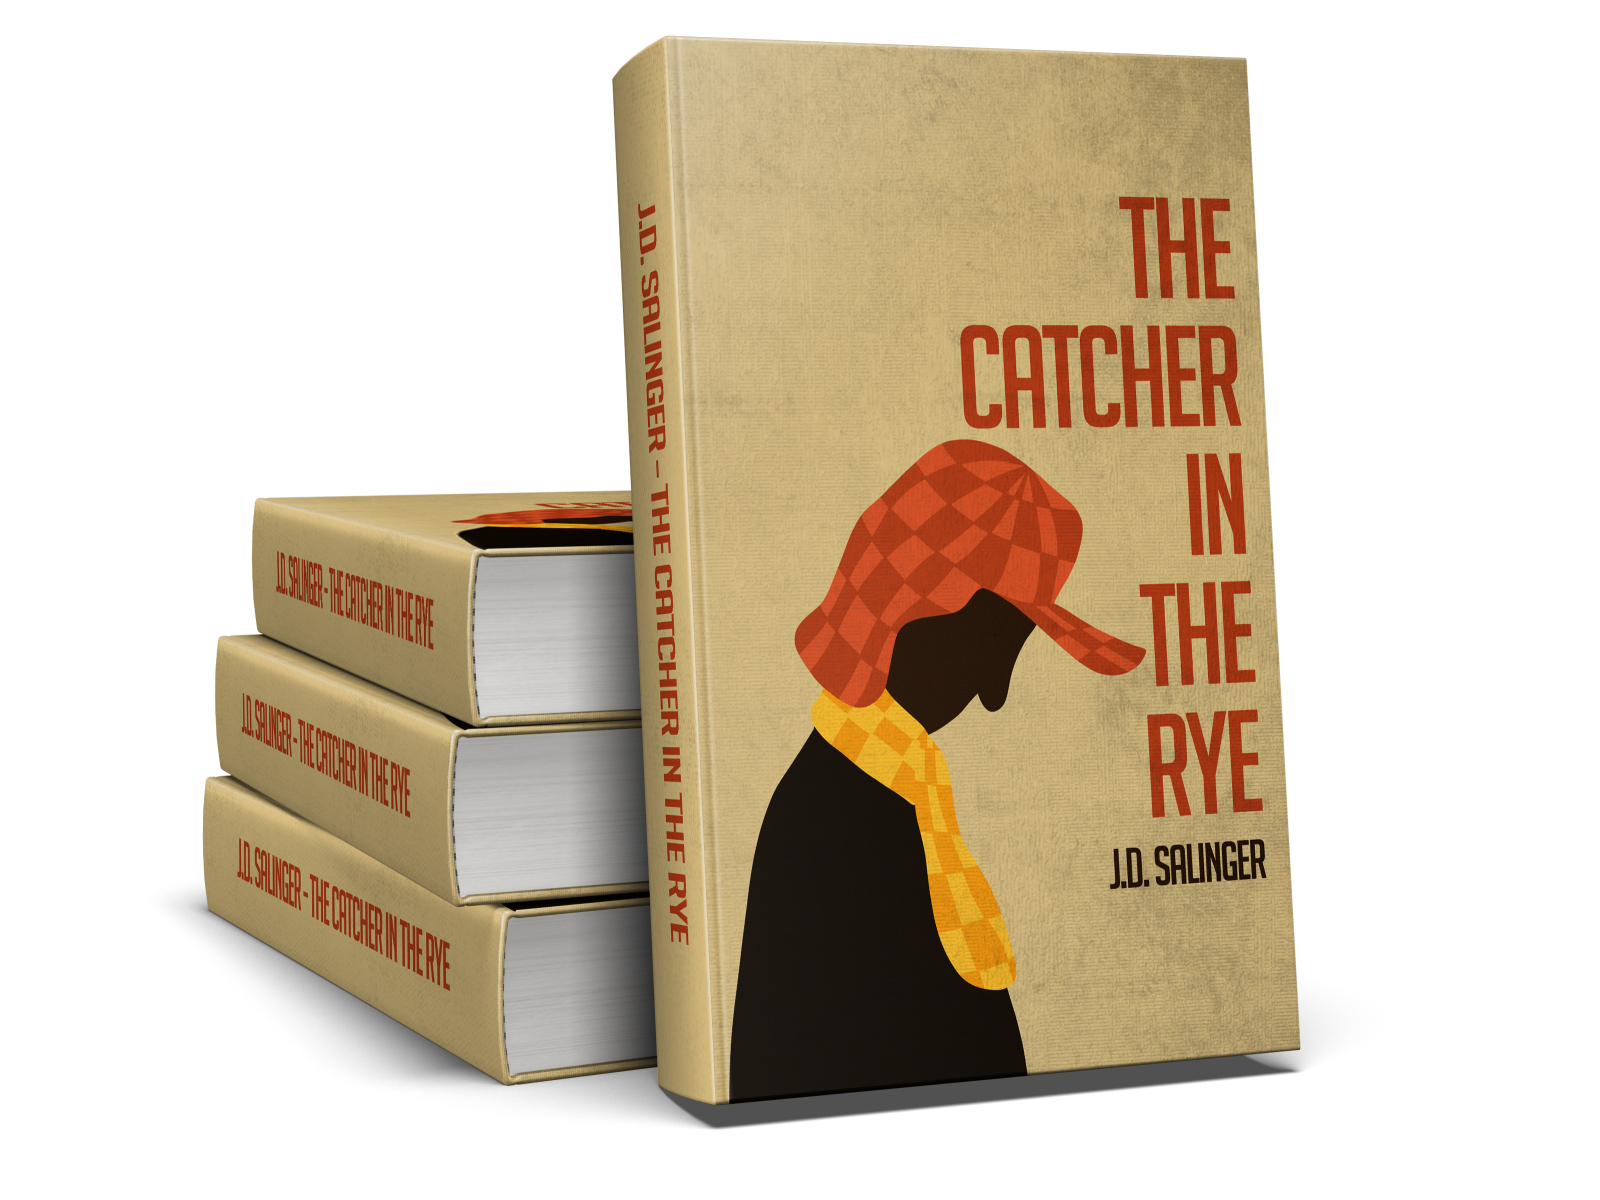 the catcher in the rye by j. d. salinger